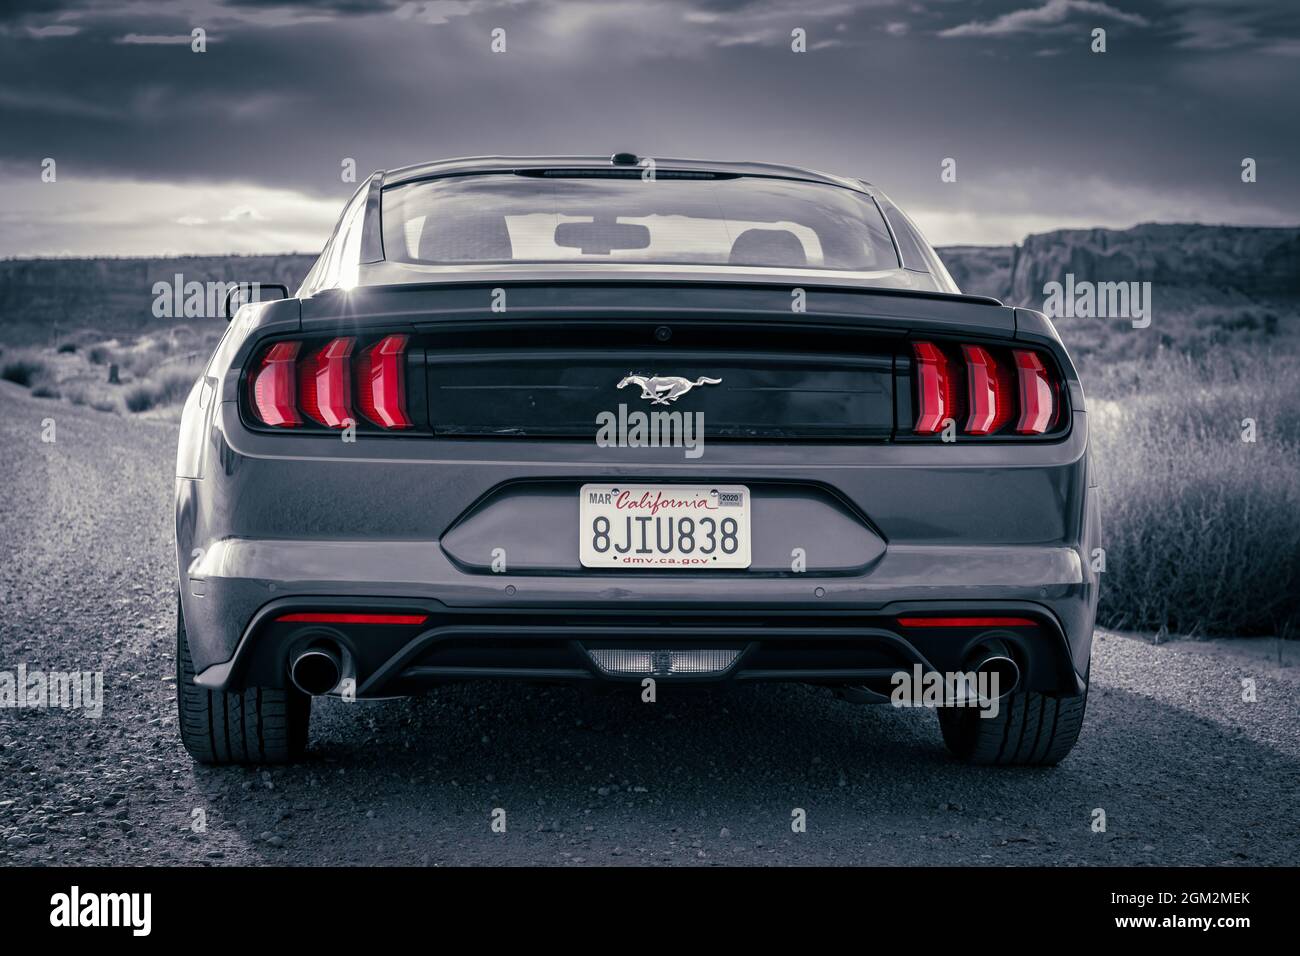 Ford Mustang American muscle car stylized in black and white with red accent tail light Stock Photo